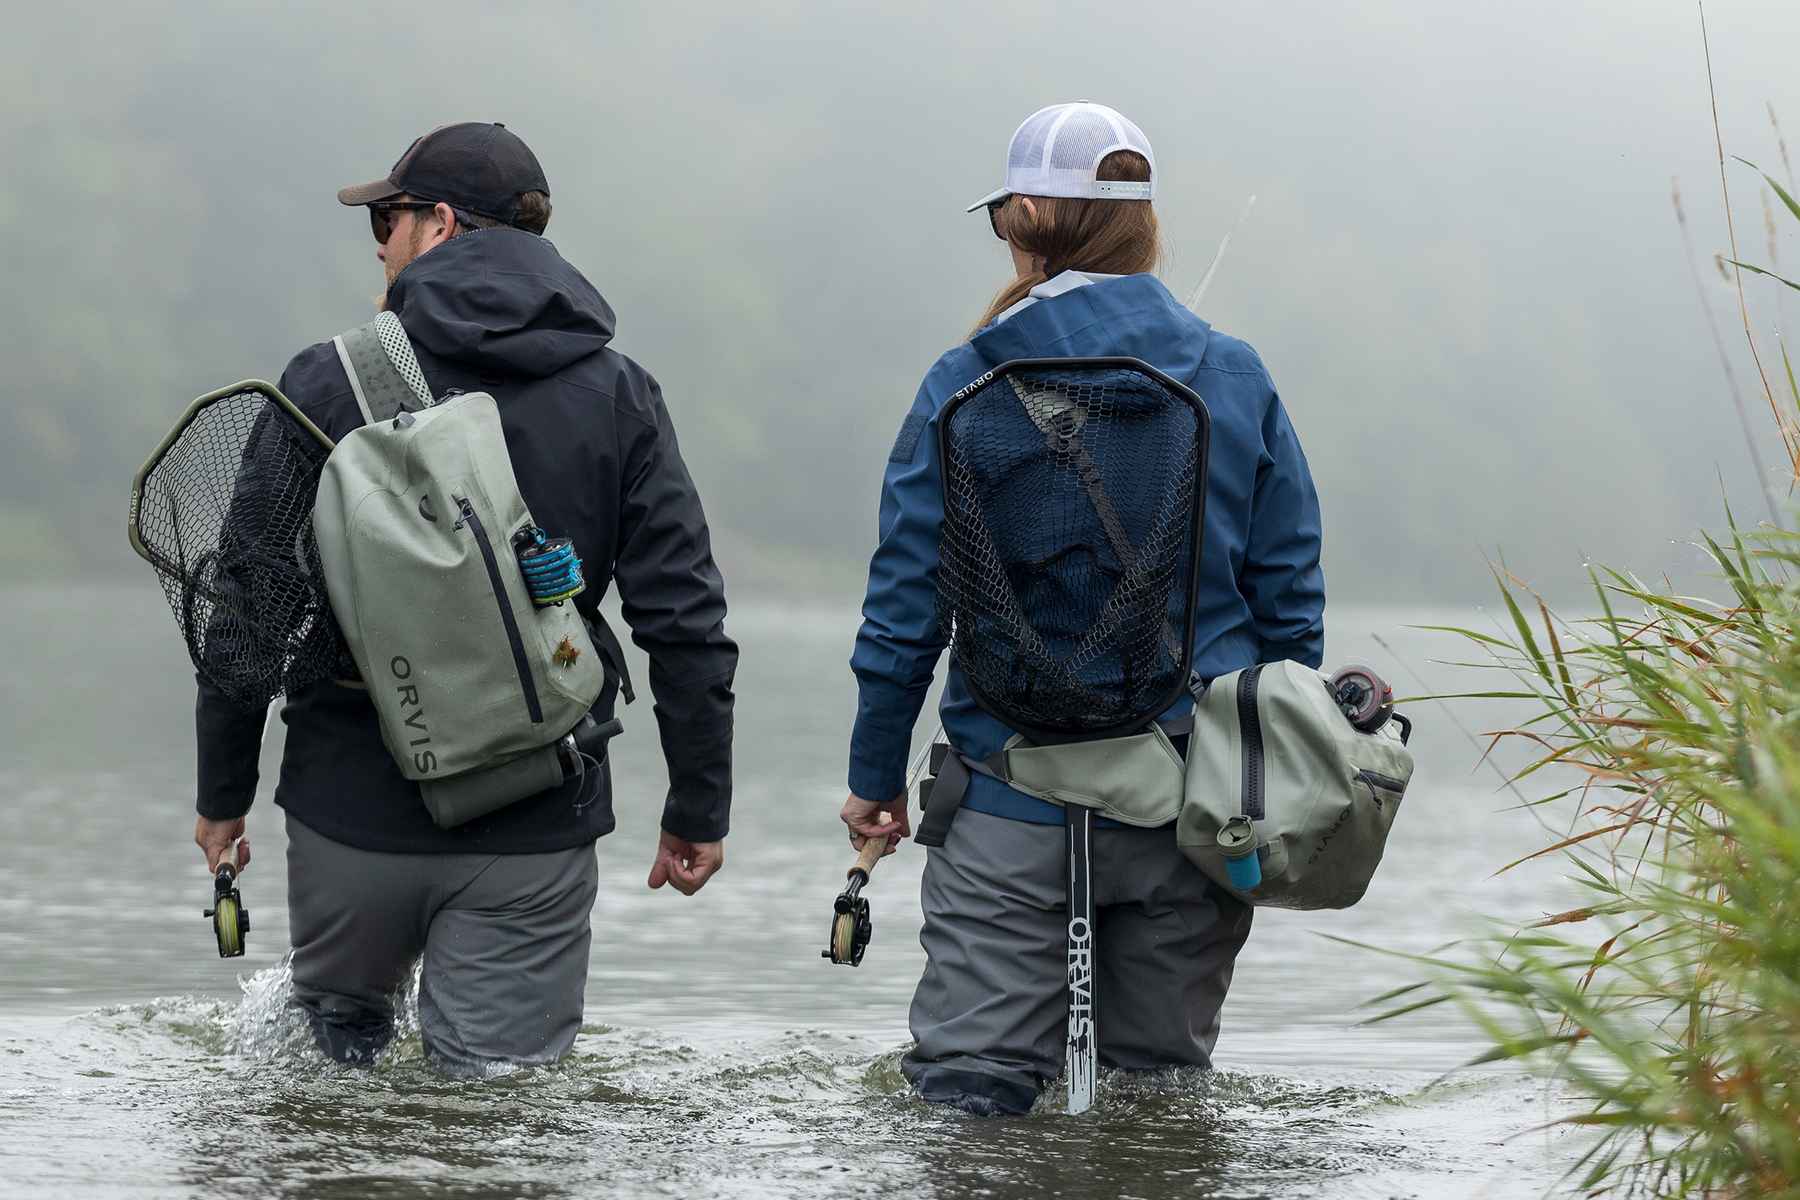 Selecting a Sling Pack for Fly Fishing - What's Best? - Guide